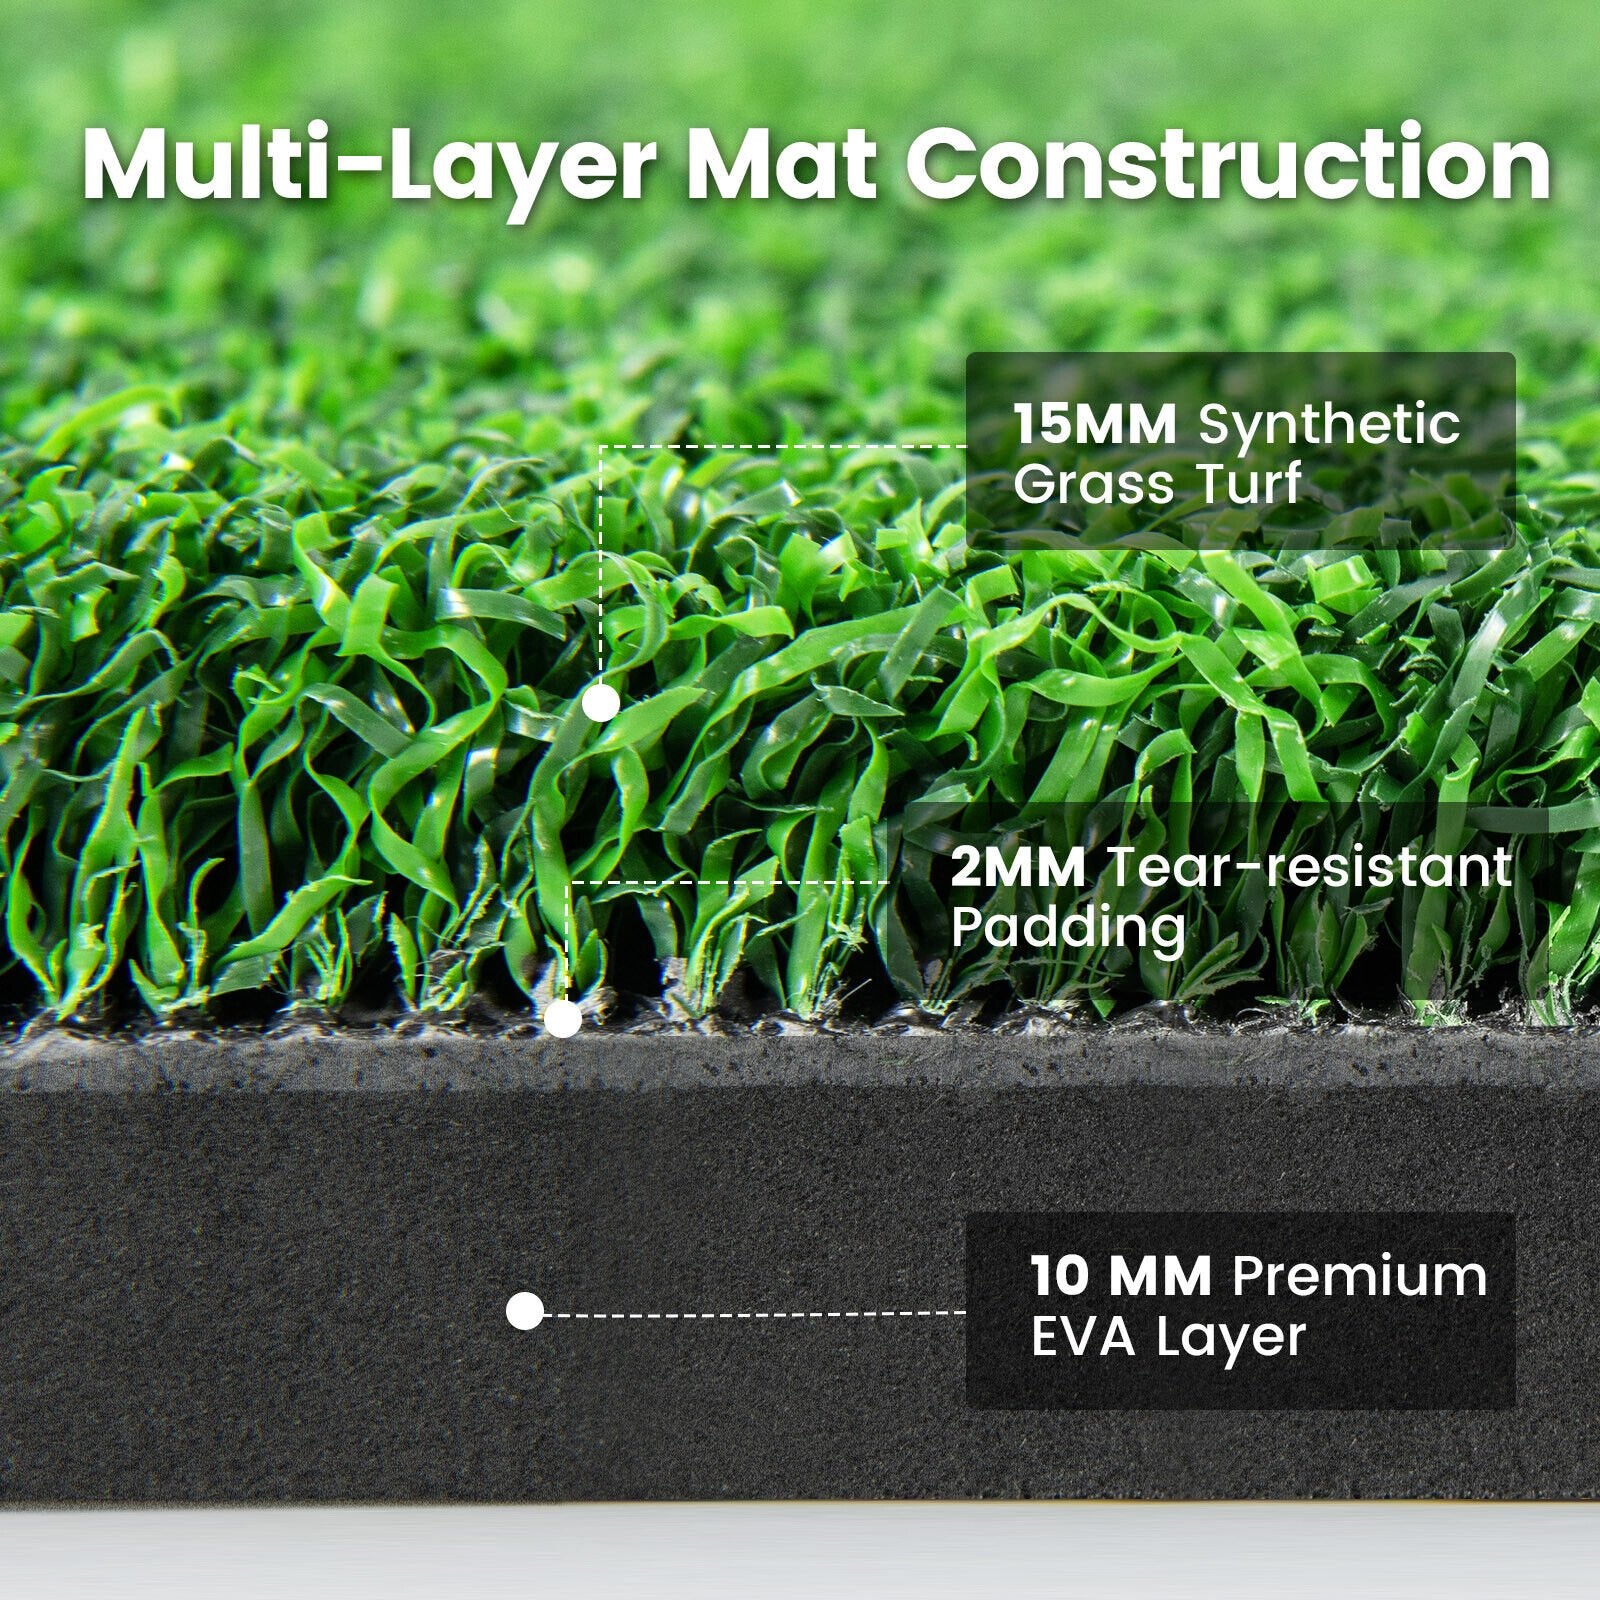 5 x 3 ft Artificial Turf Grass Practice Mat for Indoors and Outdoors-27mm, Green Golf   at Gallery Canada